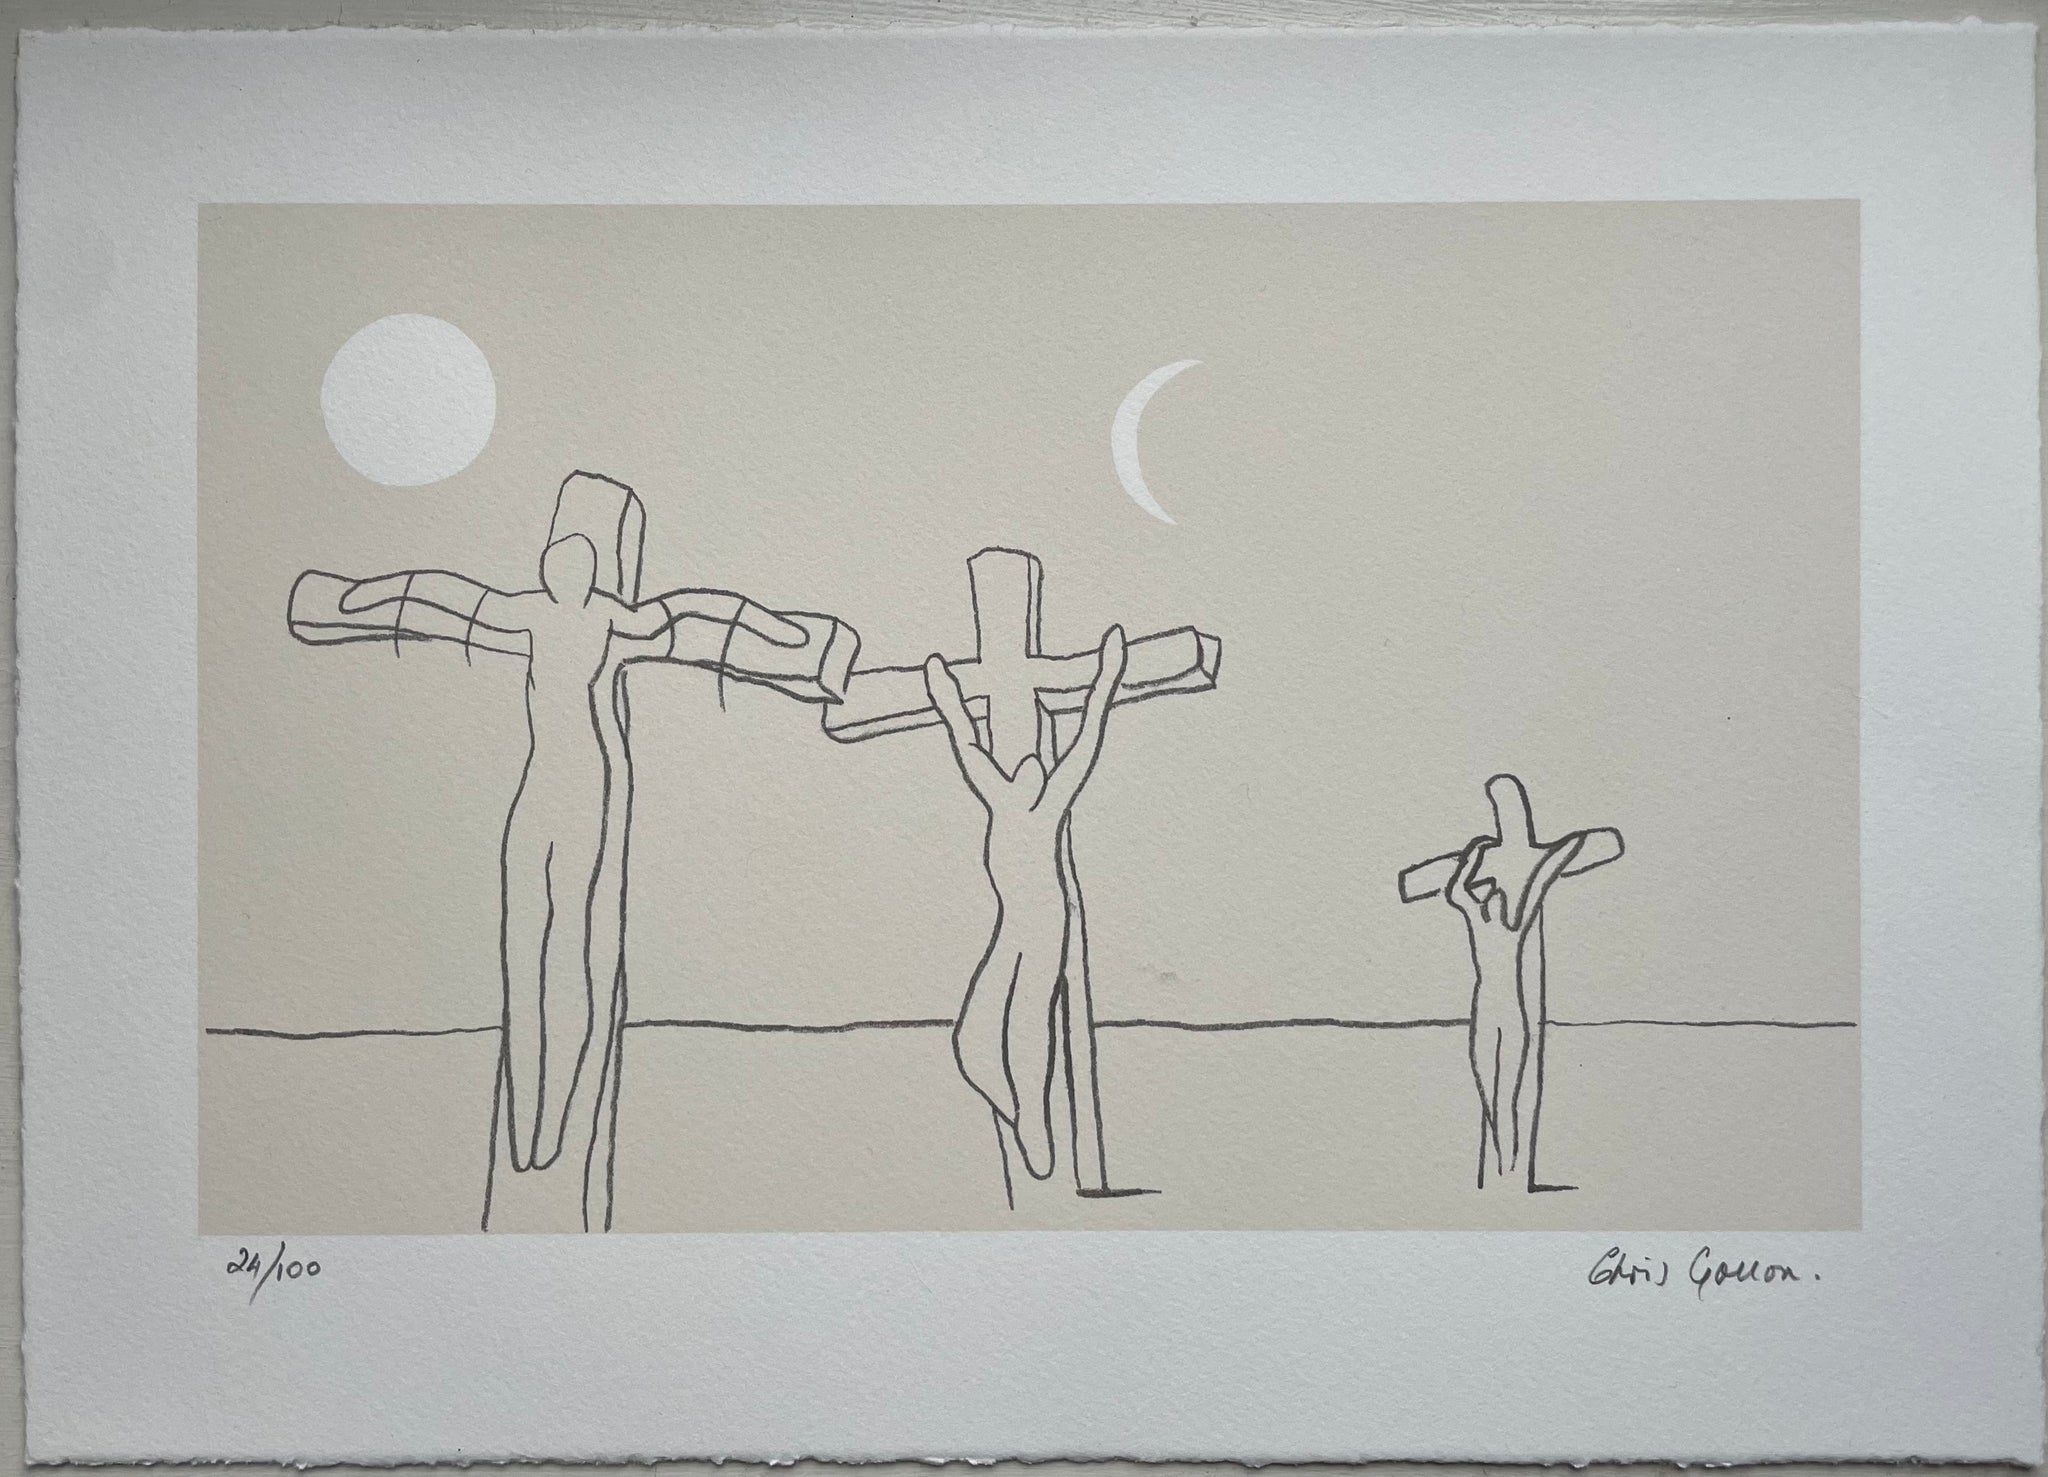 Stations of the Cross print and book